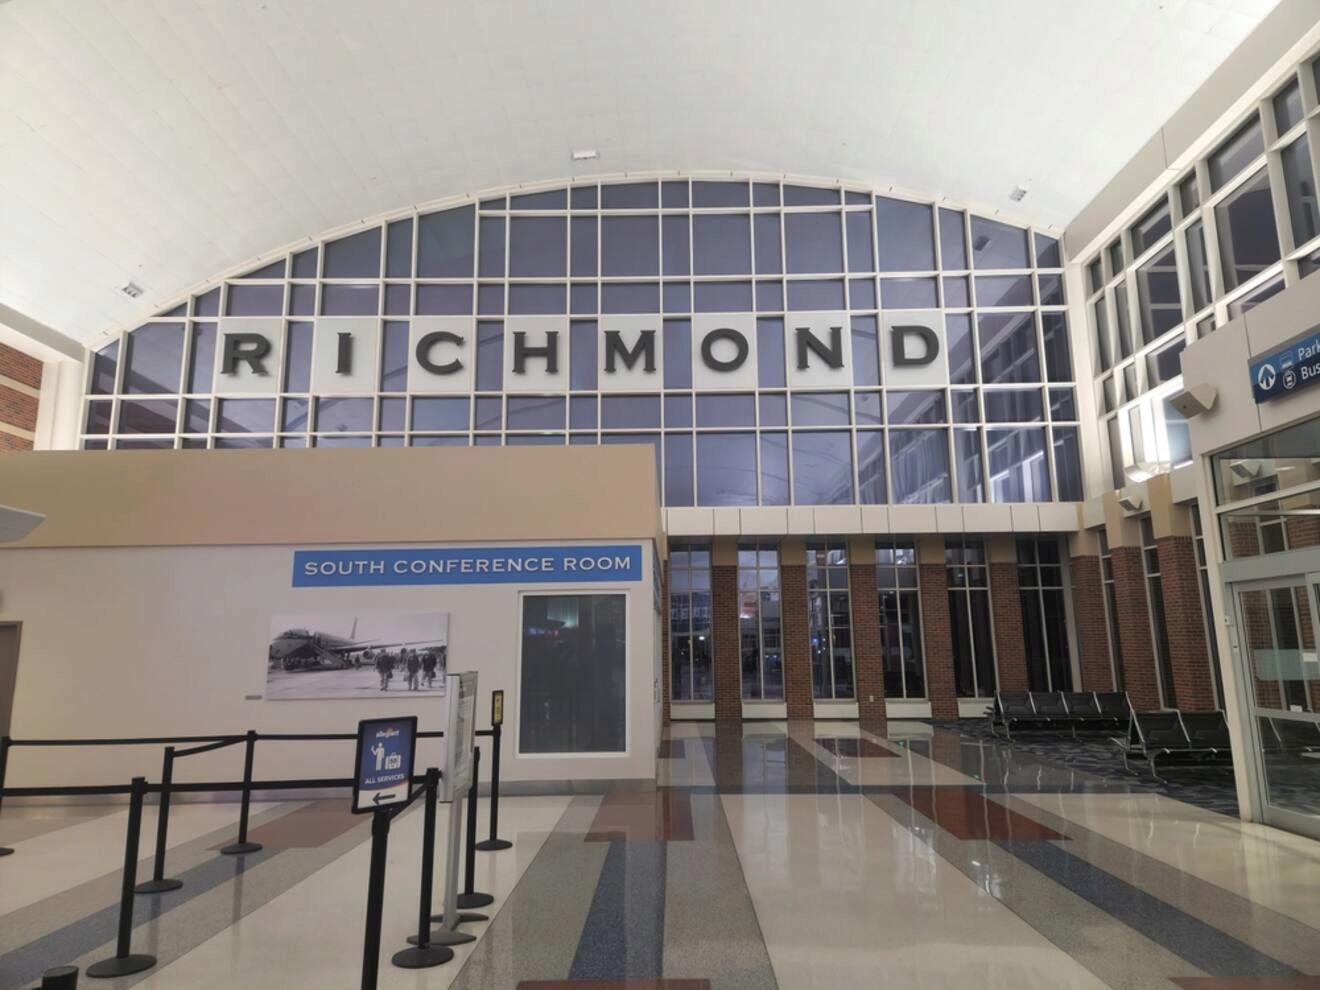 Spacious interior of Richmond airport with large windows spelling 'RICHMOND,' providing a bright and modern gateway to the city